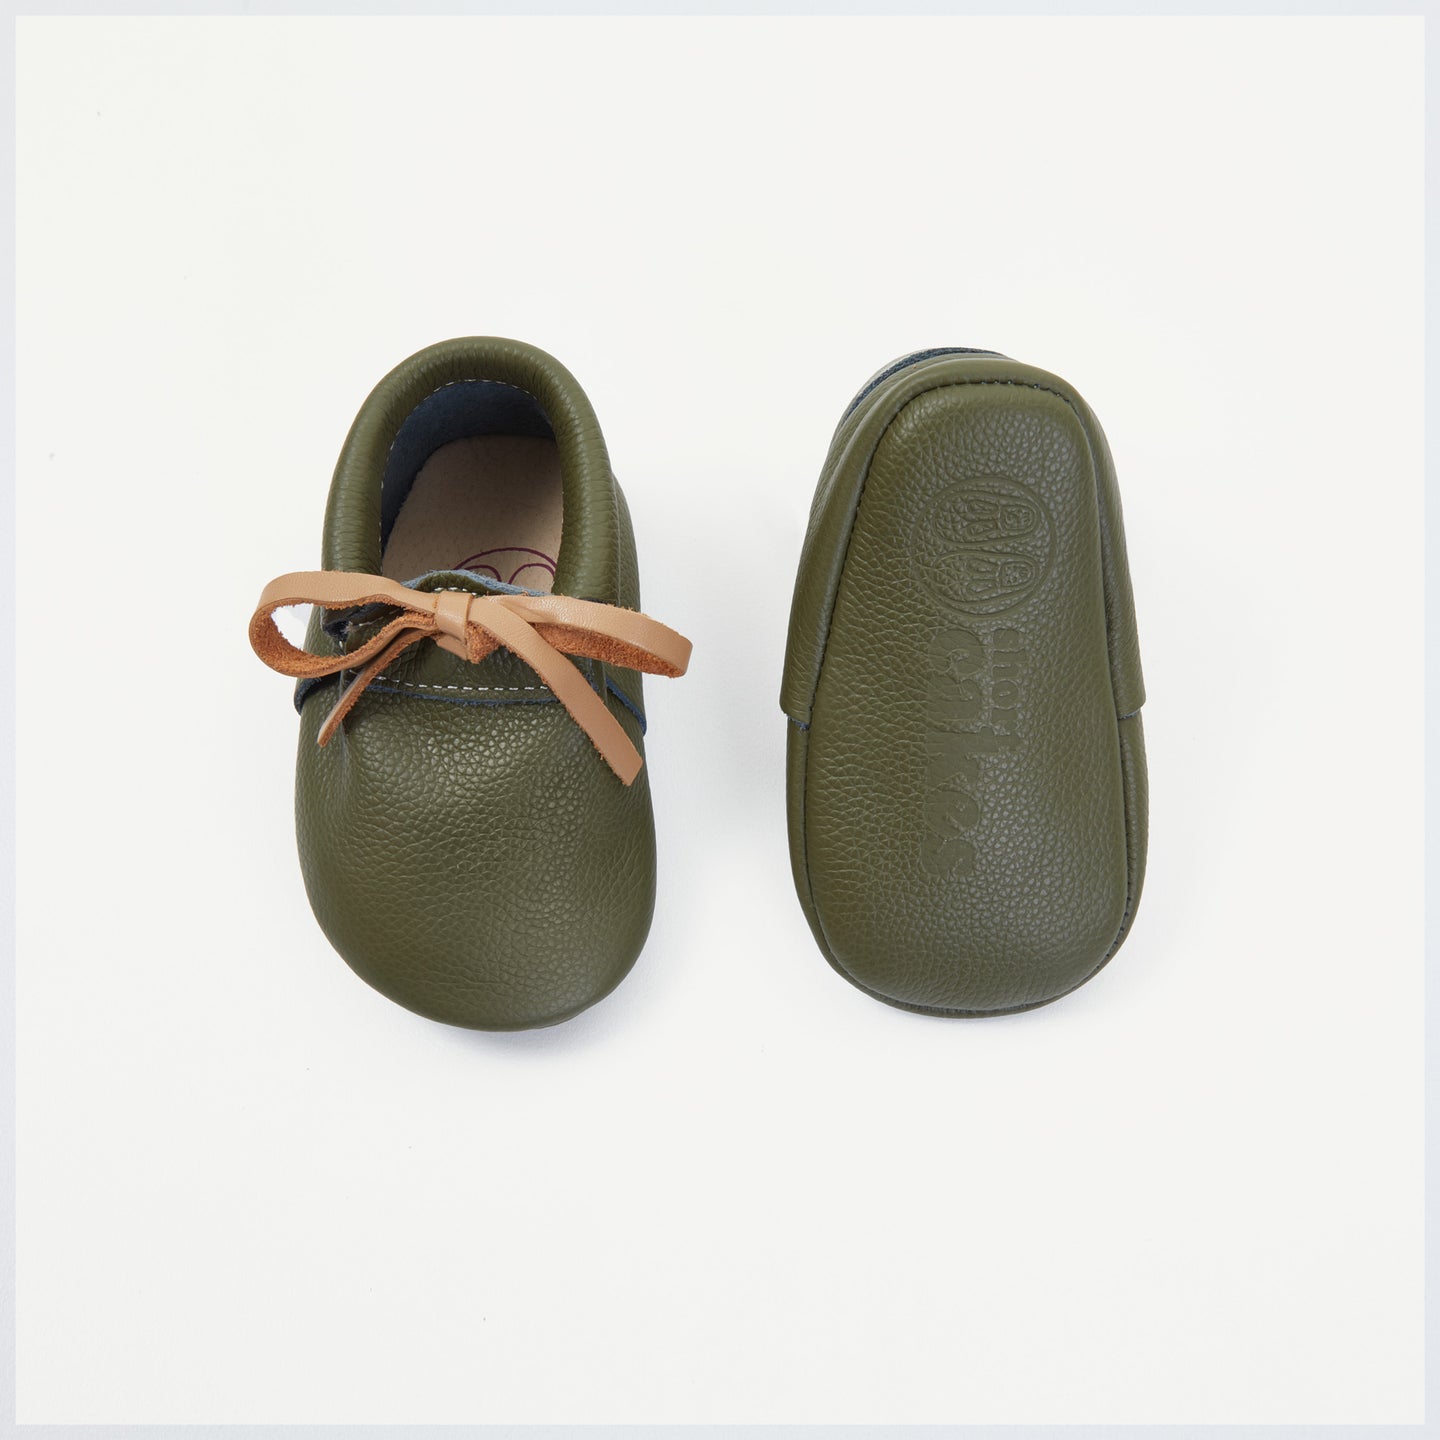 hudson military leather baby booties